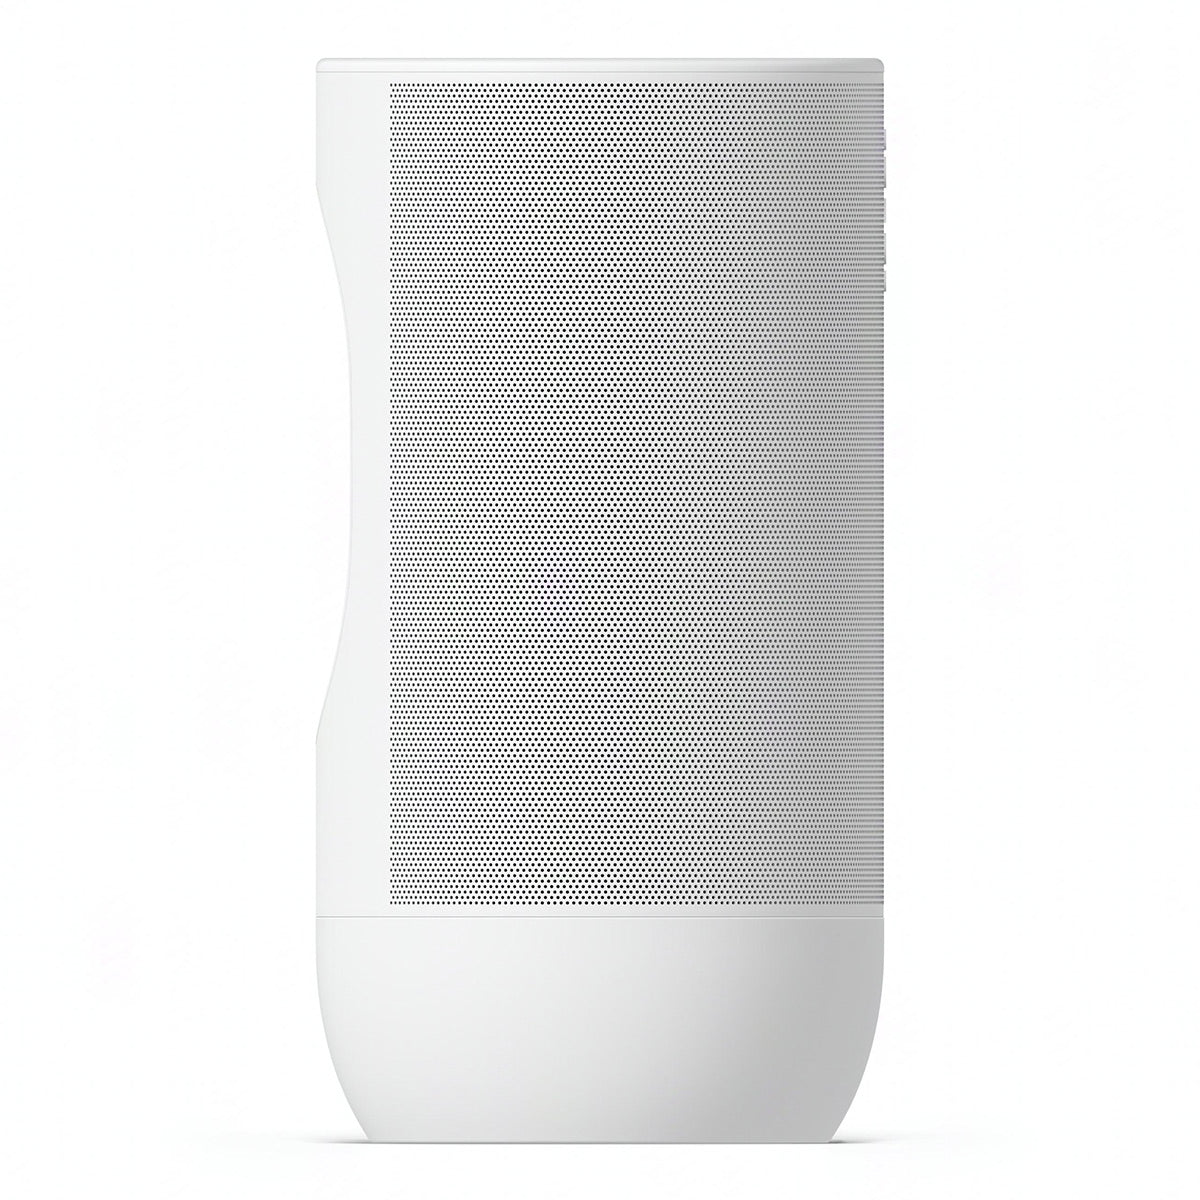 Sonos Move 2 Portable Smart Speaker with 24-Hour Battery Life, Bluetooth,  and Wi-Fi (White) | World Wide Stereo